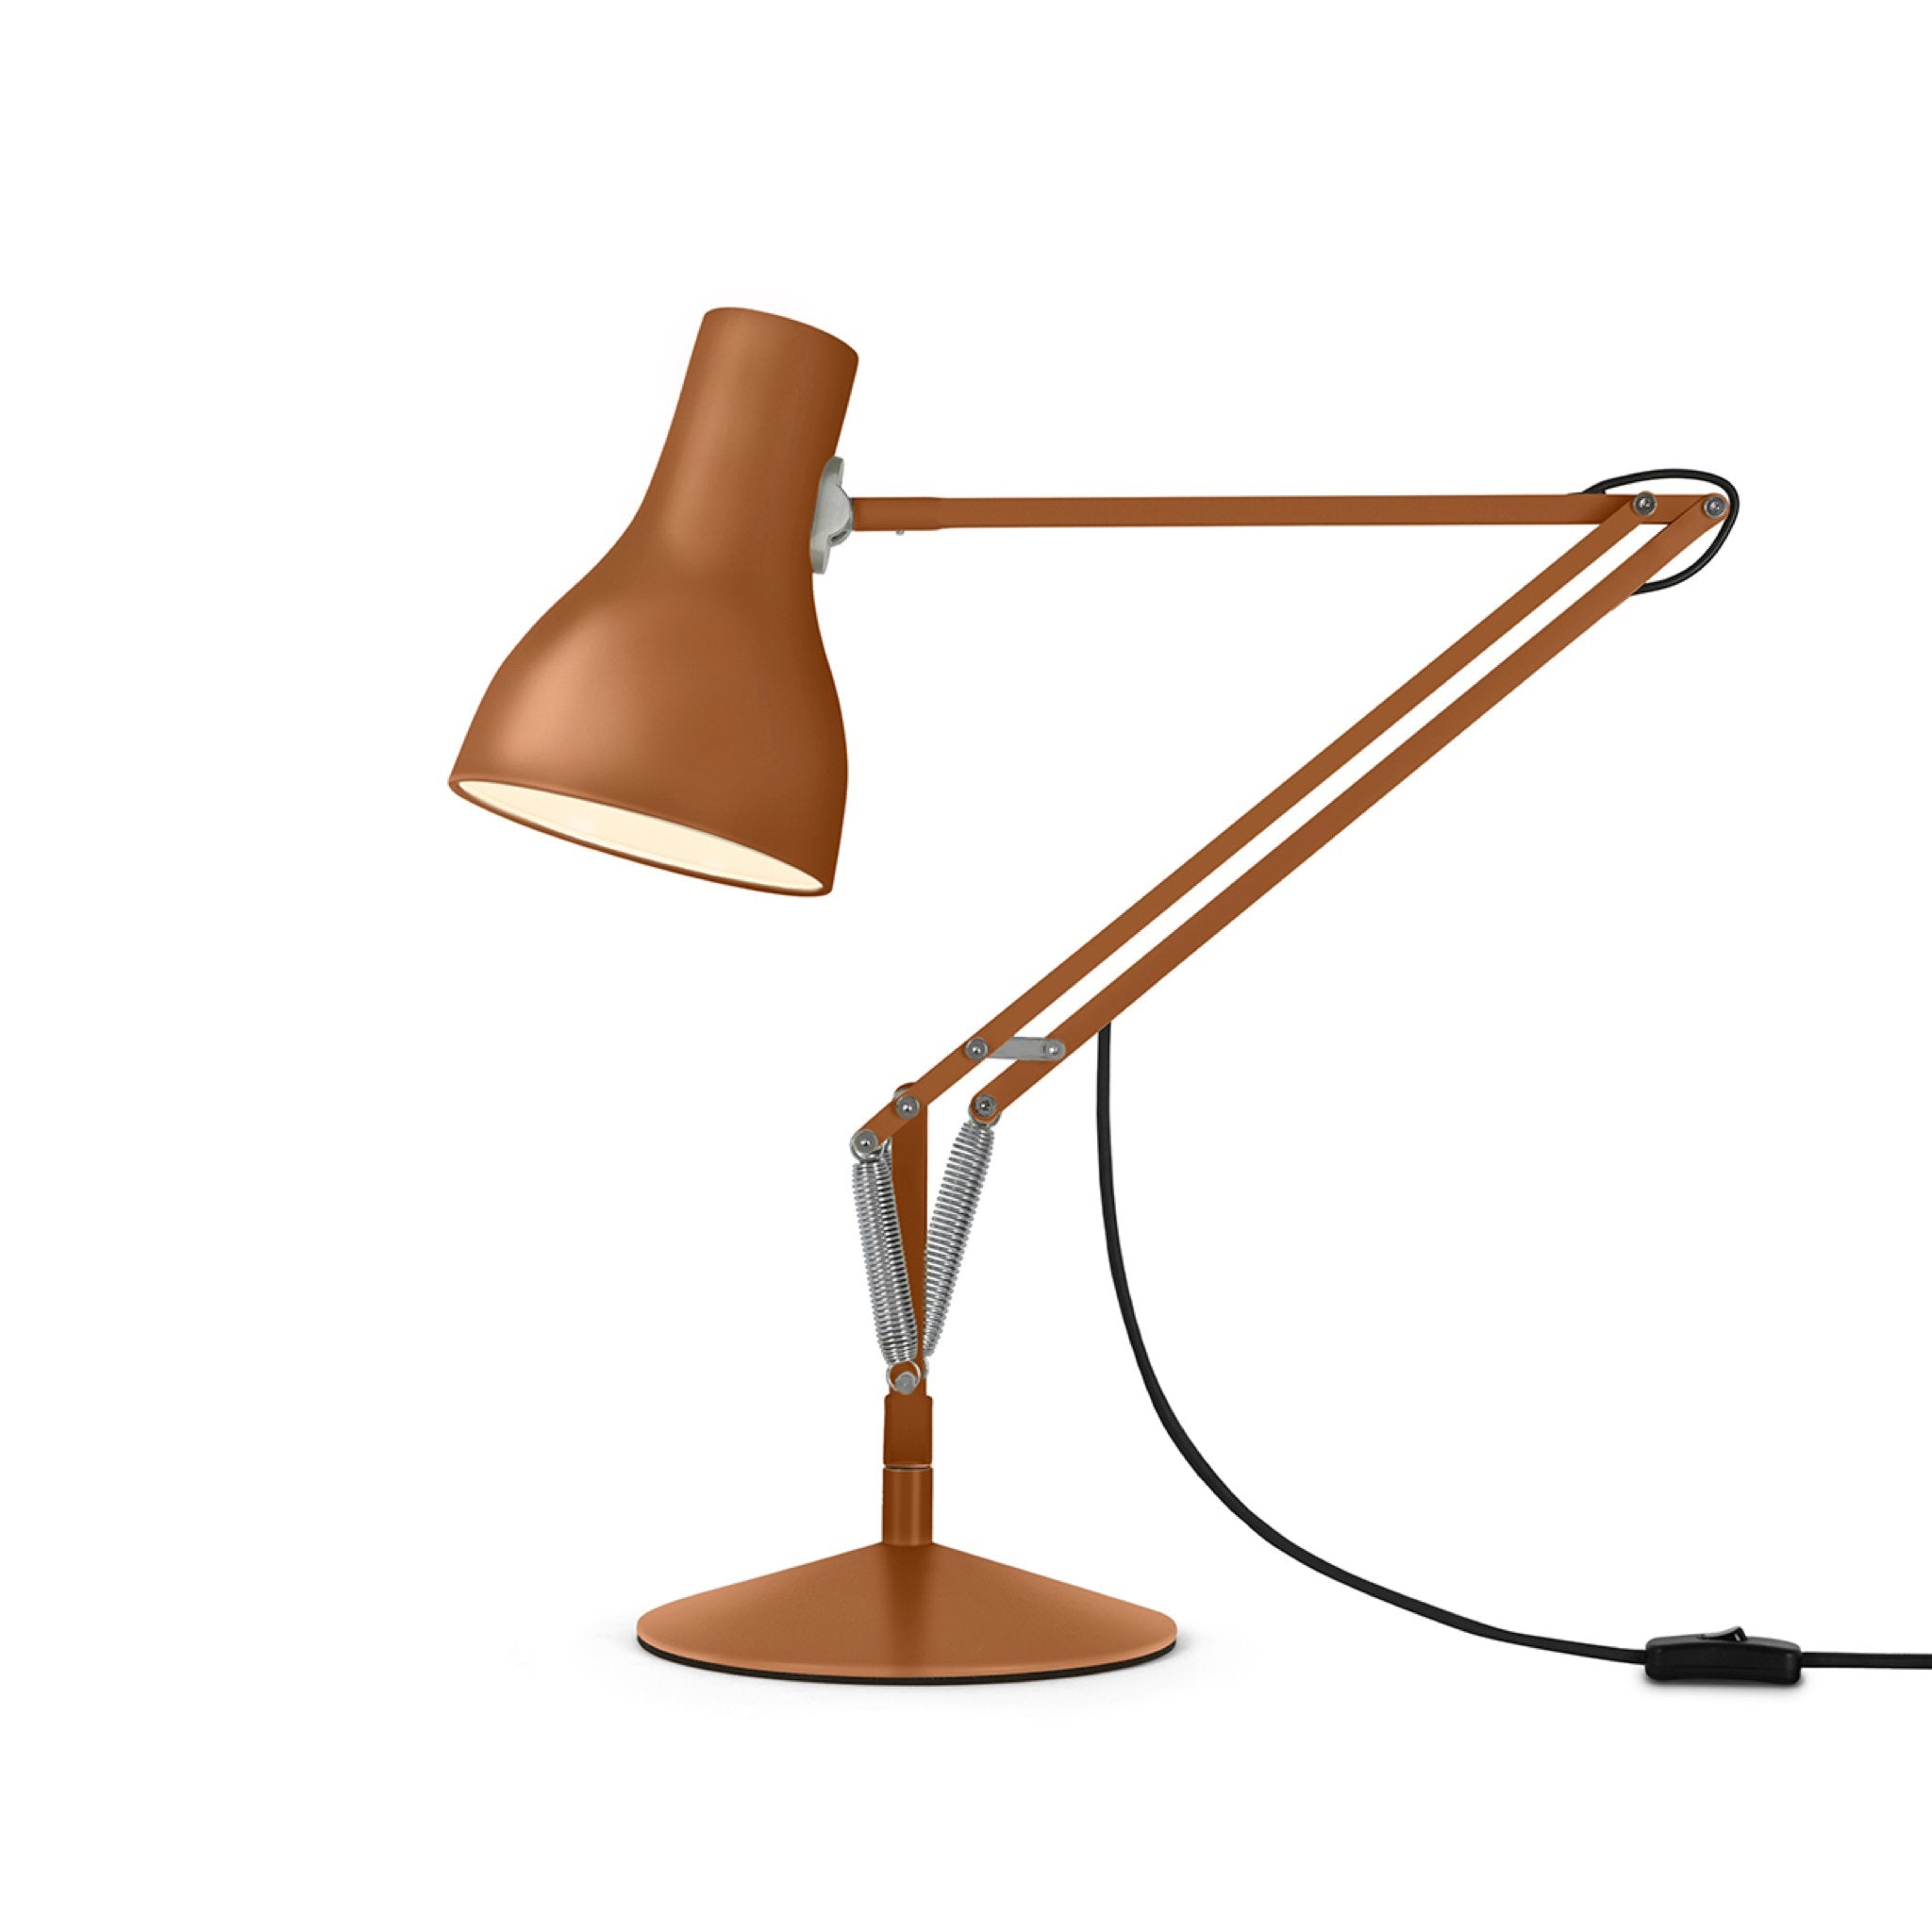 Type 75 Desk Lamp Sienna Edition by Margaret Howell for Anglepoise